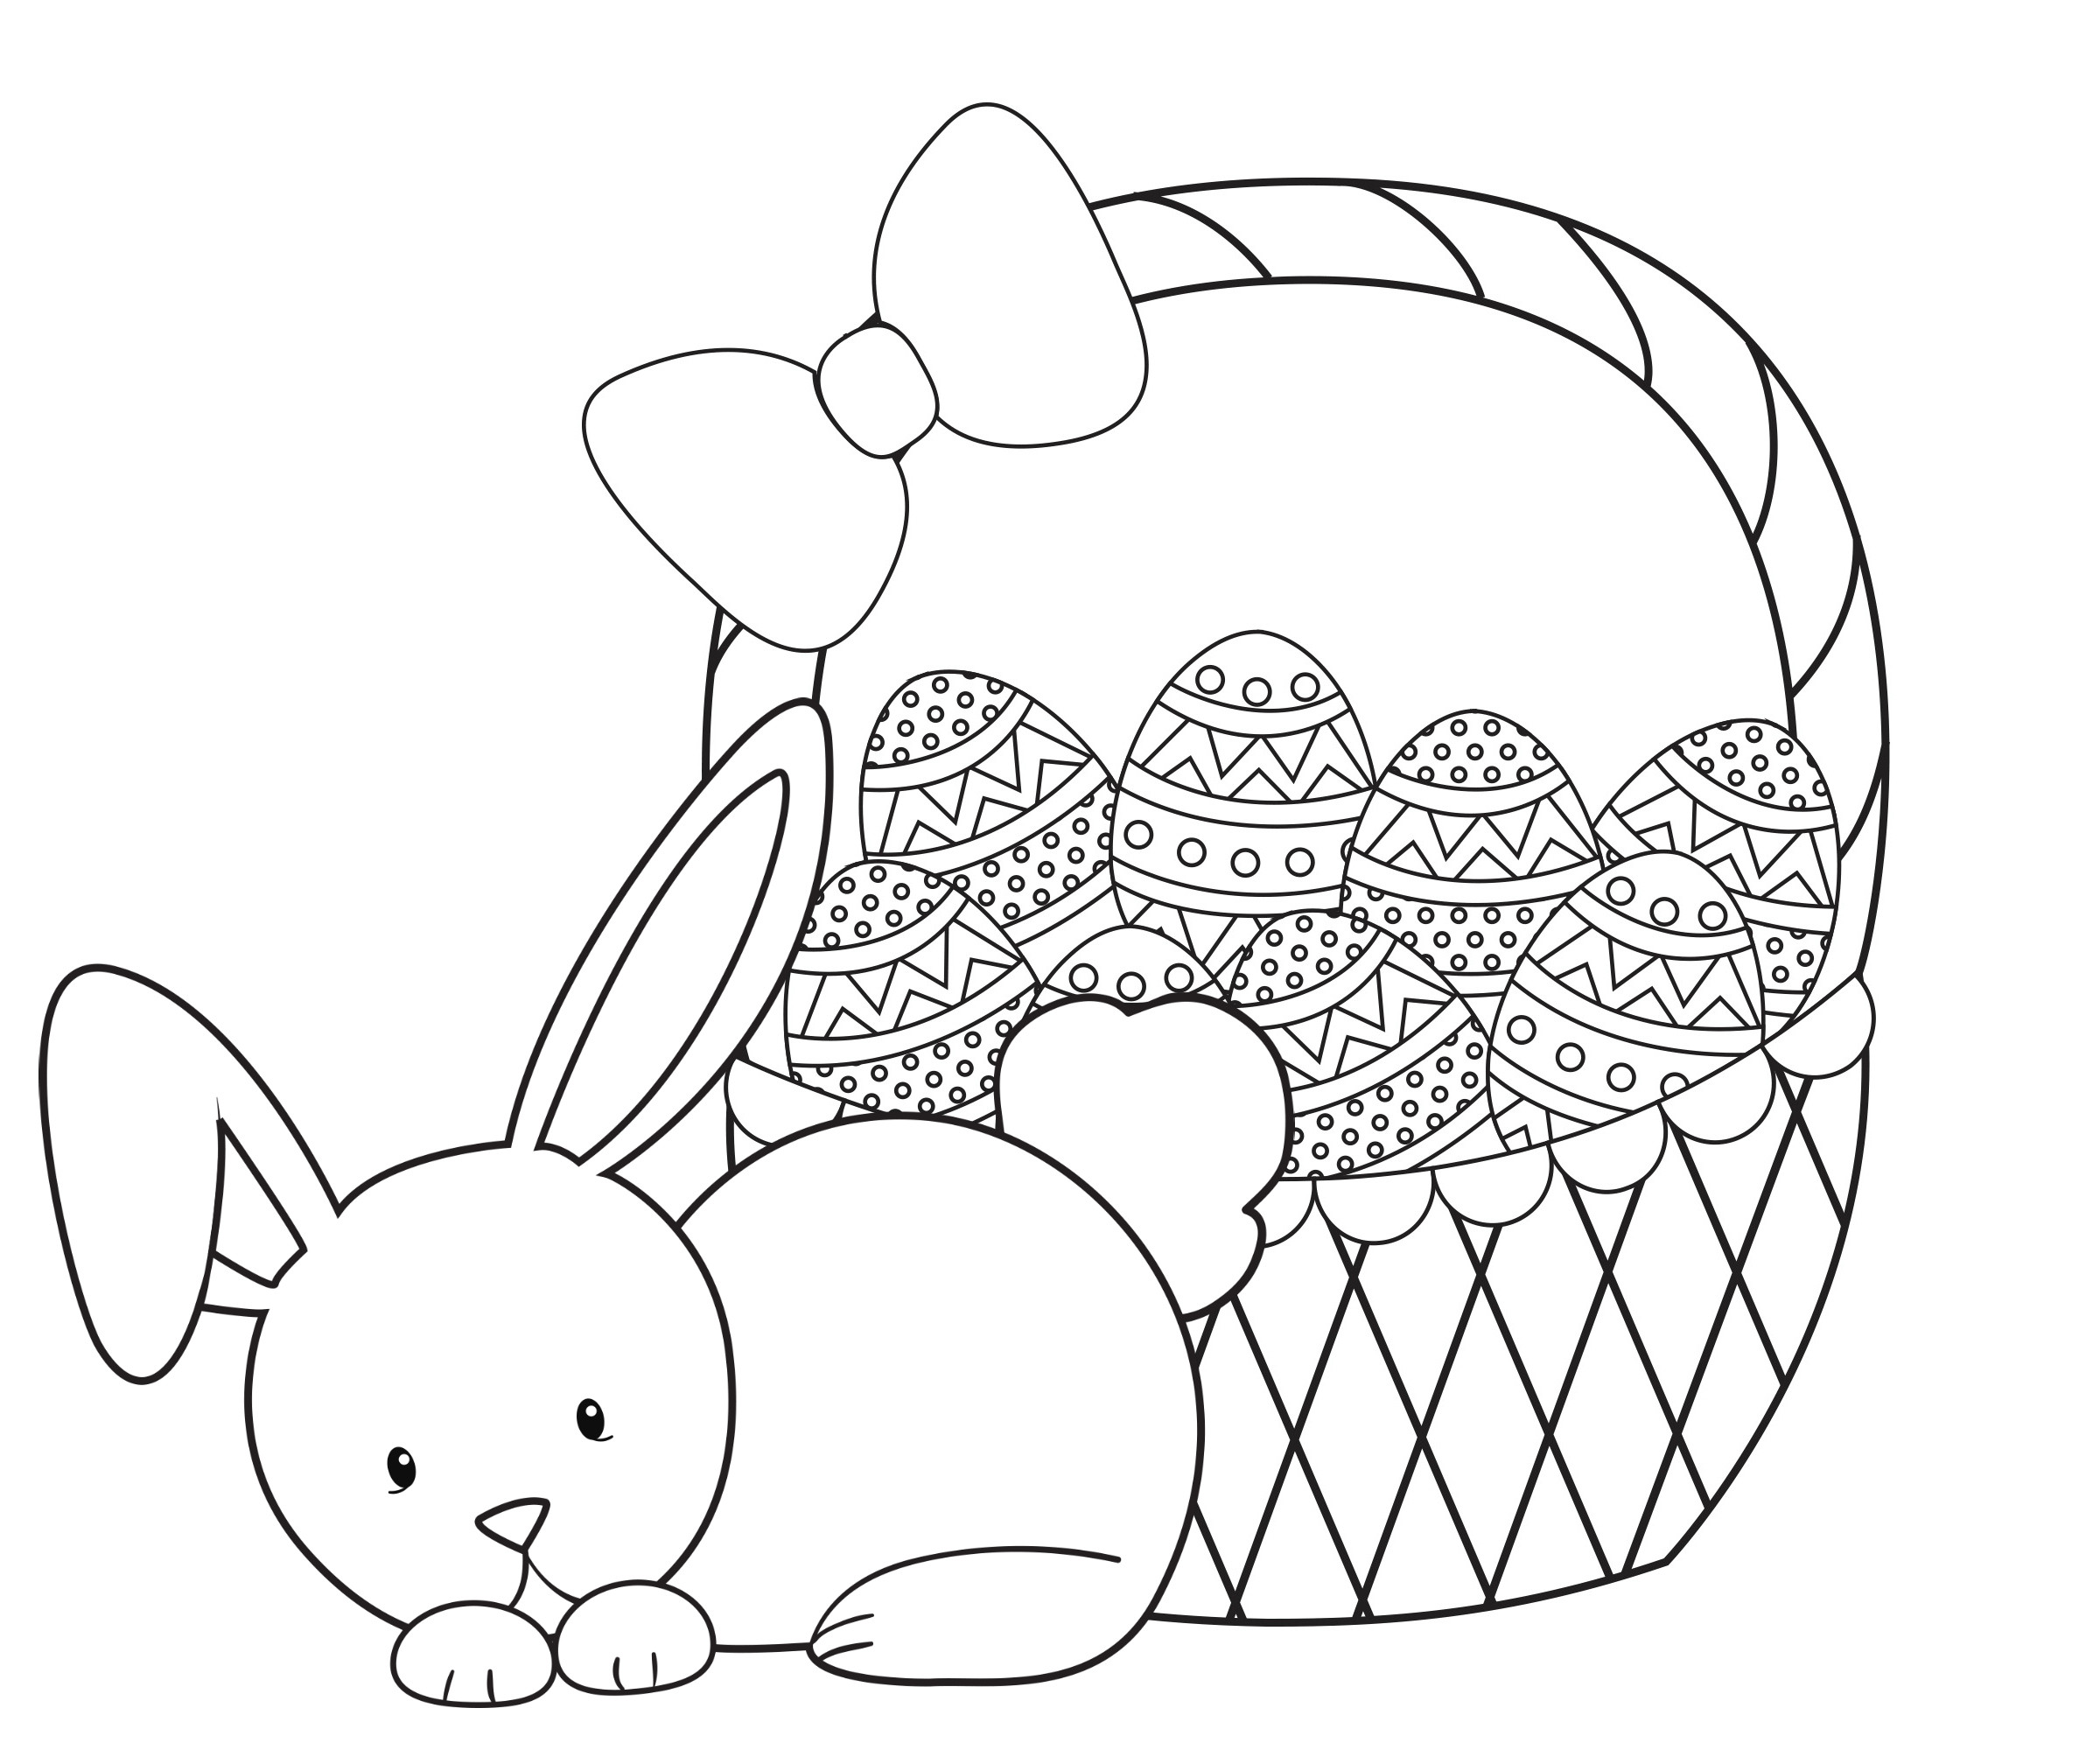 Toddler Easter Coloring Pages
 Easter Coloring Pages for Kids Crazy Little Projects